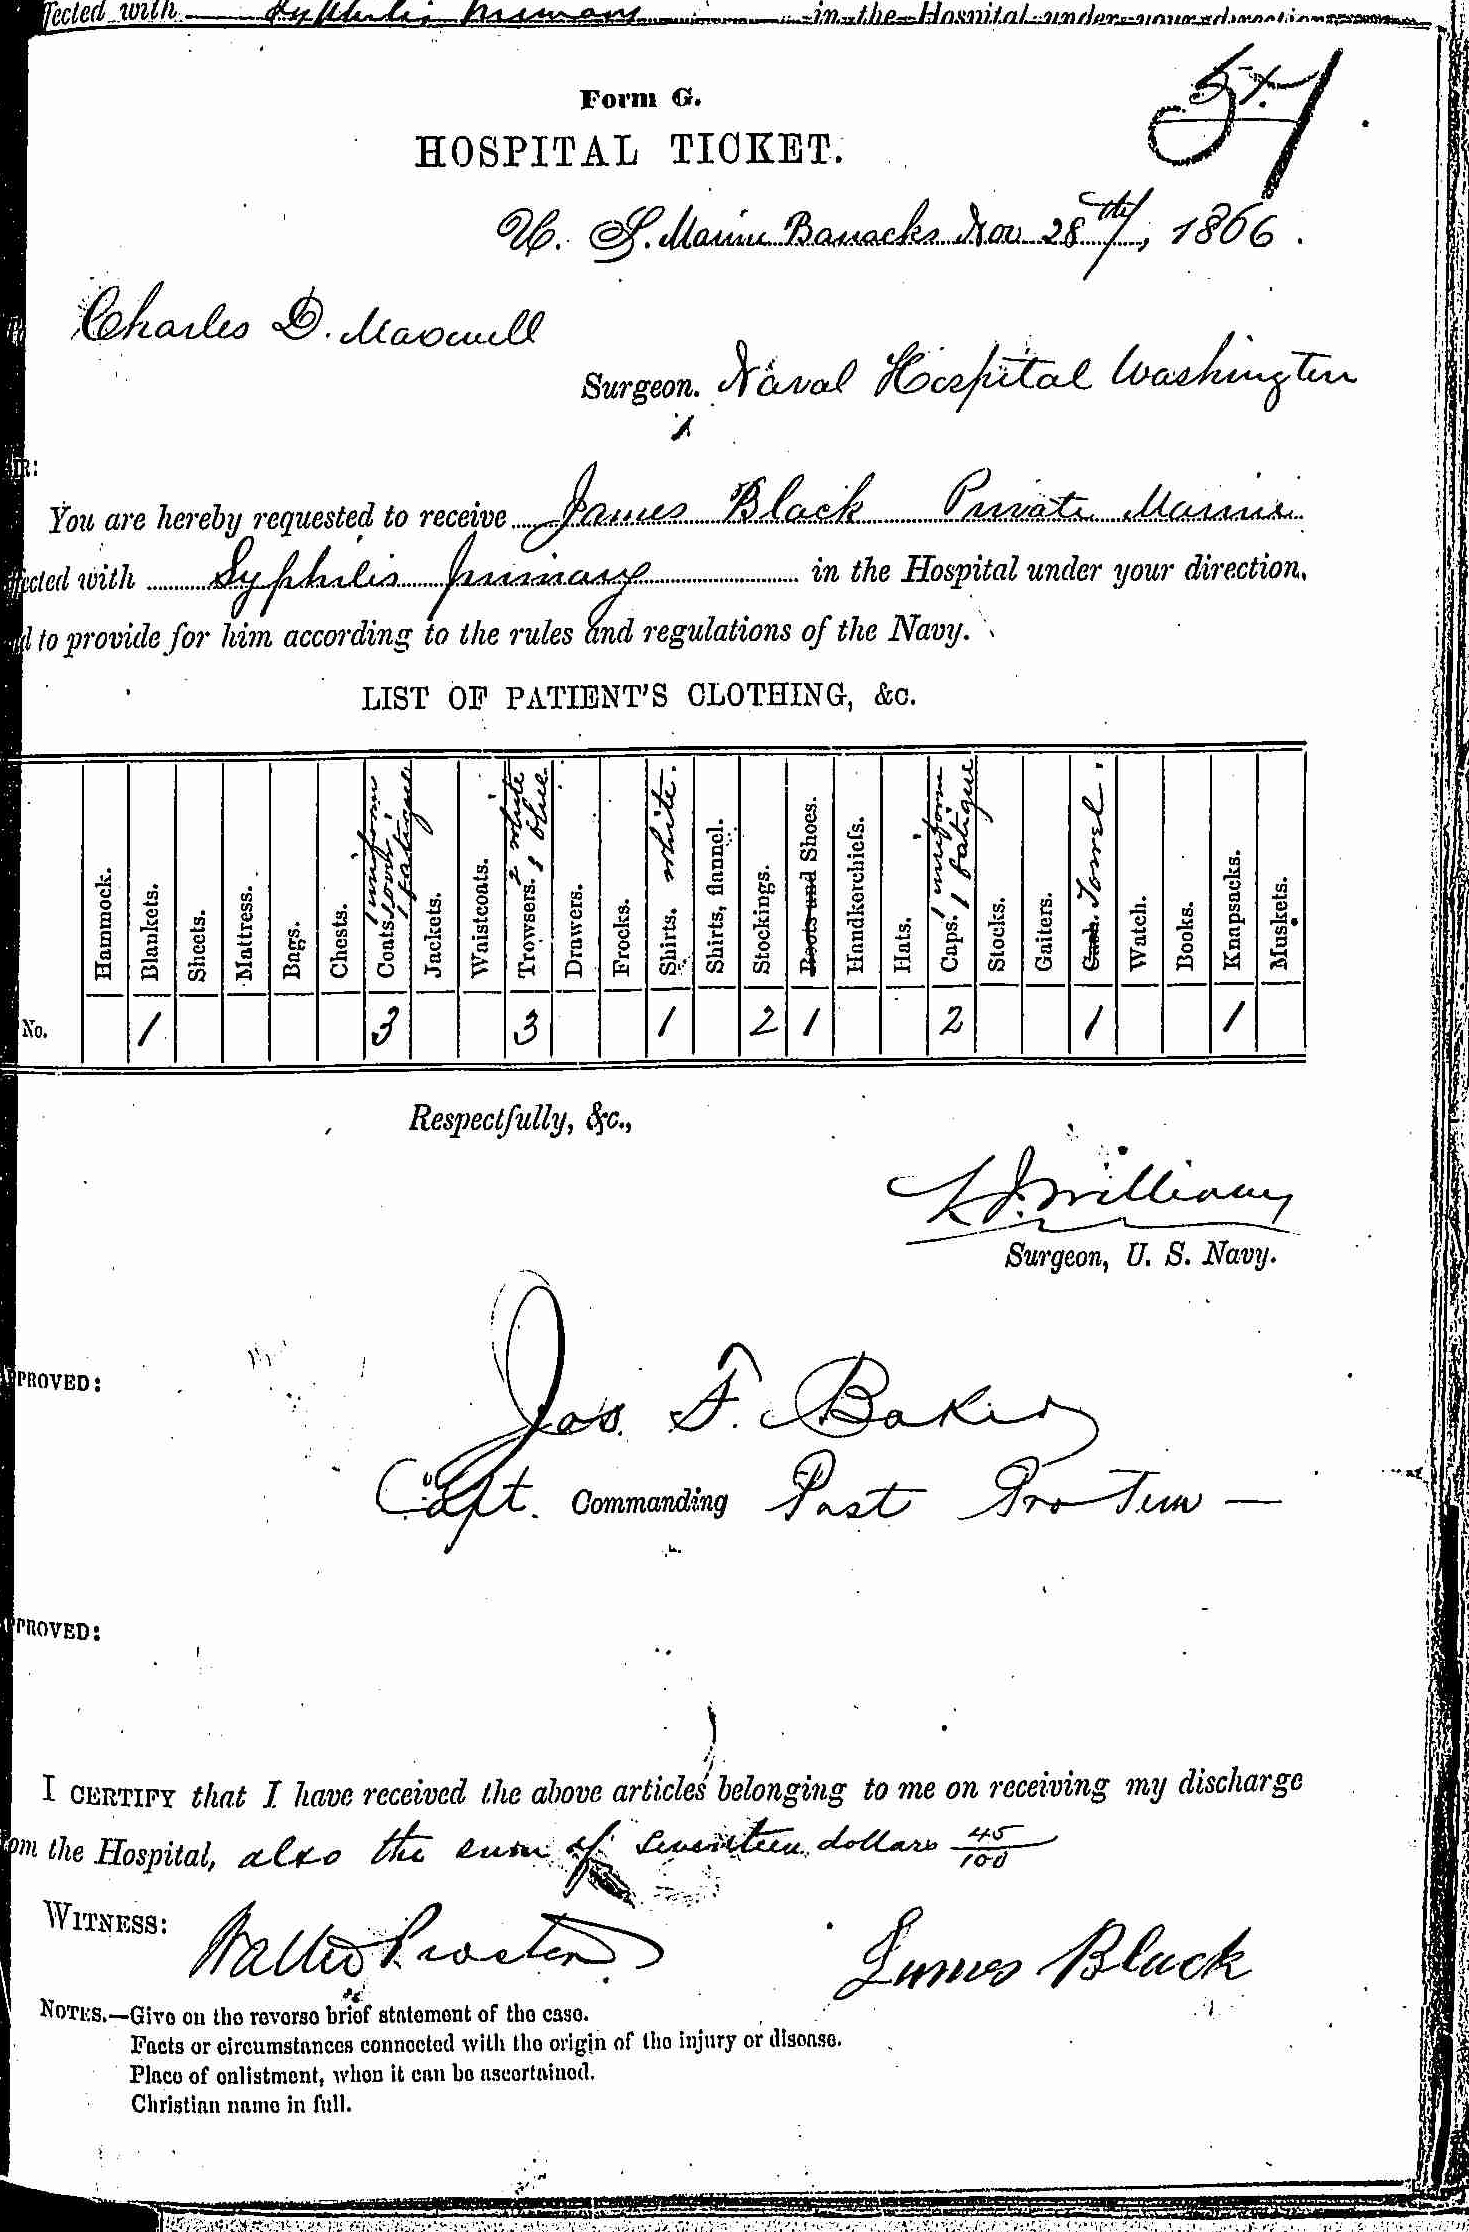 Entry for James Black (page 1 of 2) in the log Hospital Tickets and Case Papers - Naval Hospital - Washington, D.C. - 1865-68